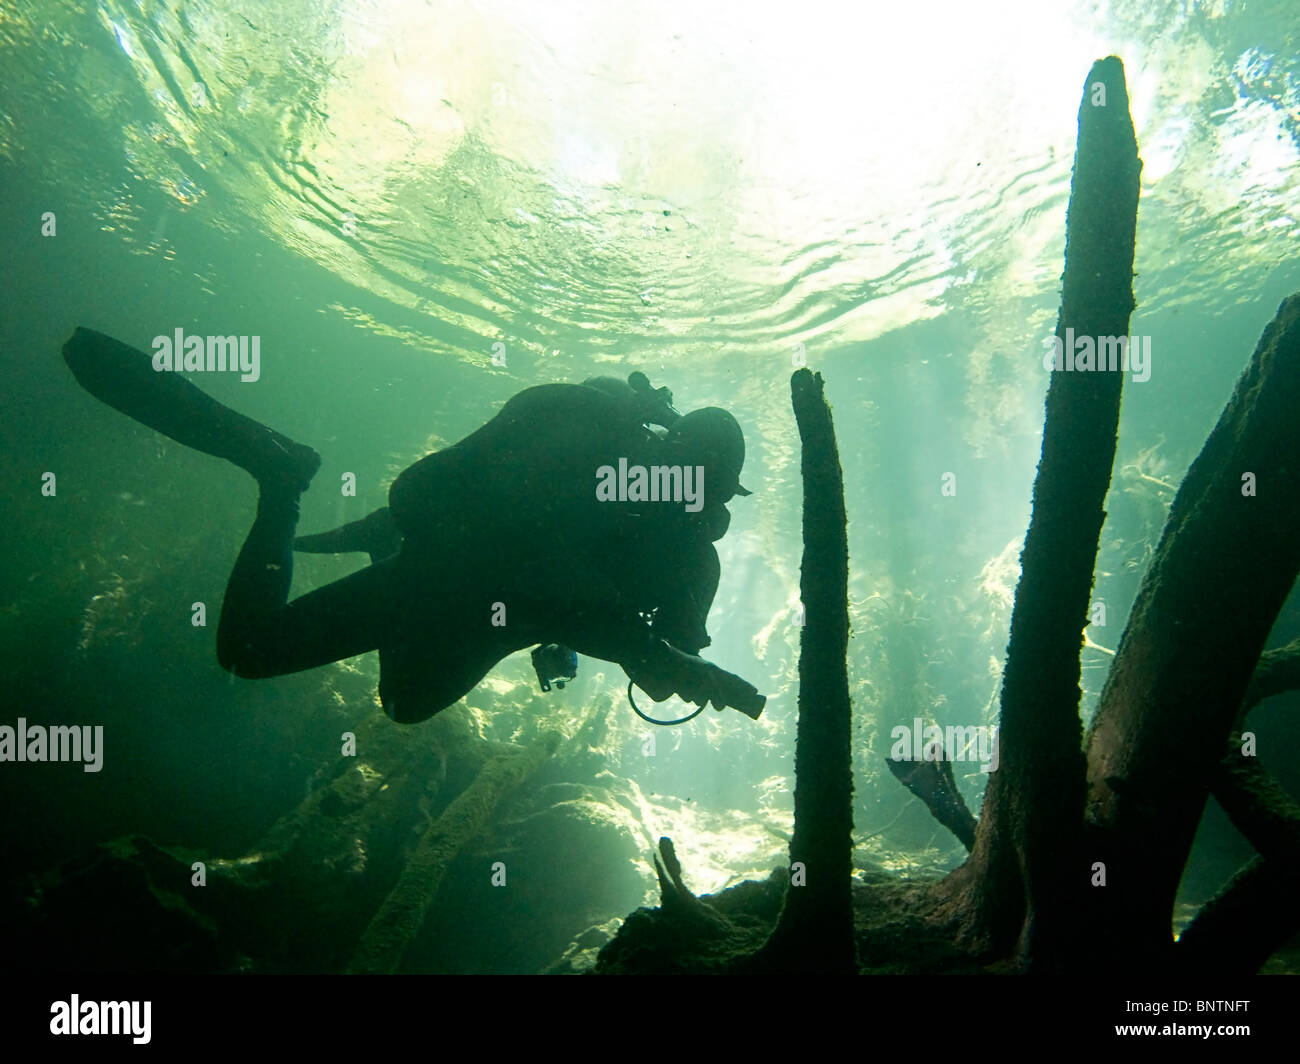 Scuba diving into Chac Mool, one of the cave systems on the Yucatan Peninsula of Mexico. Stock Photo